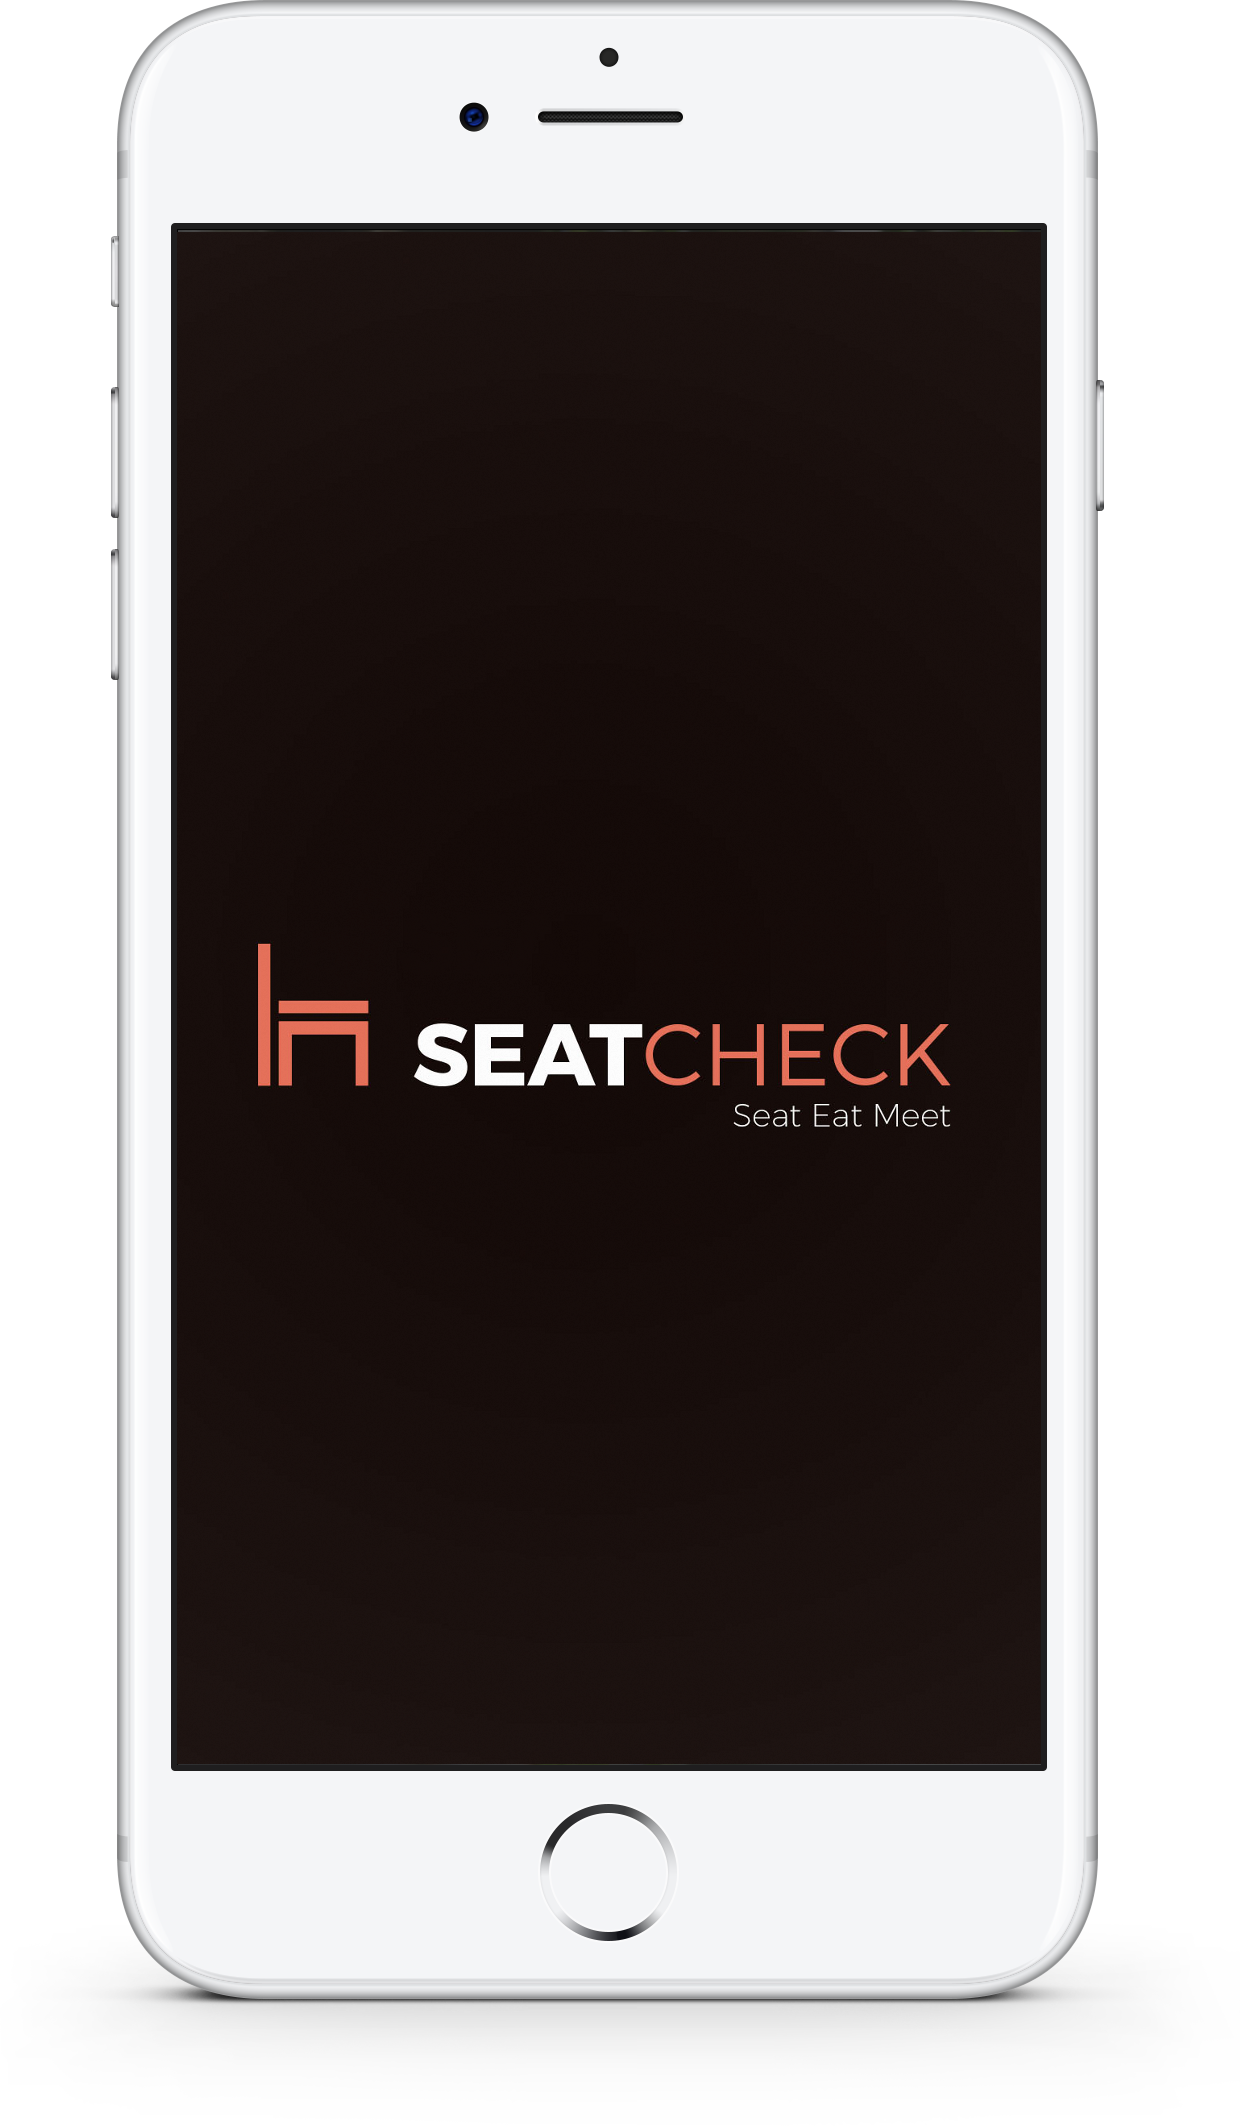 seatcheck launch screen